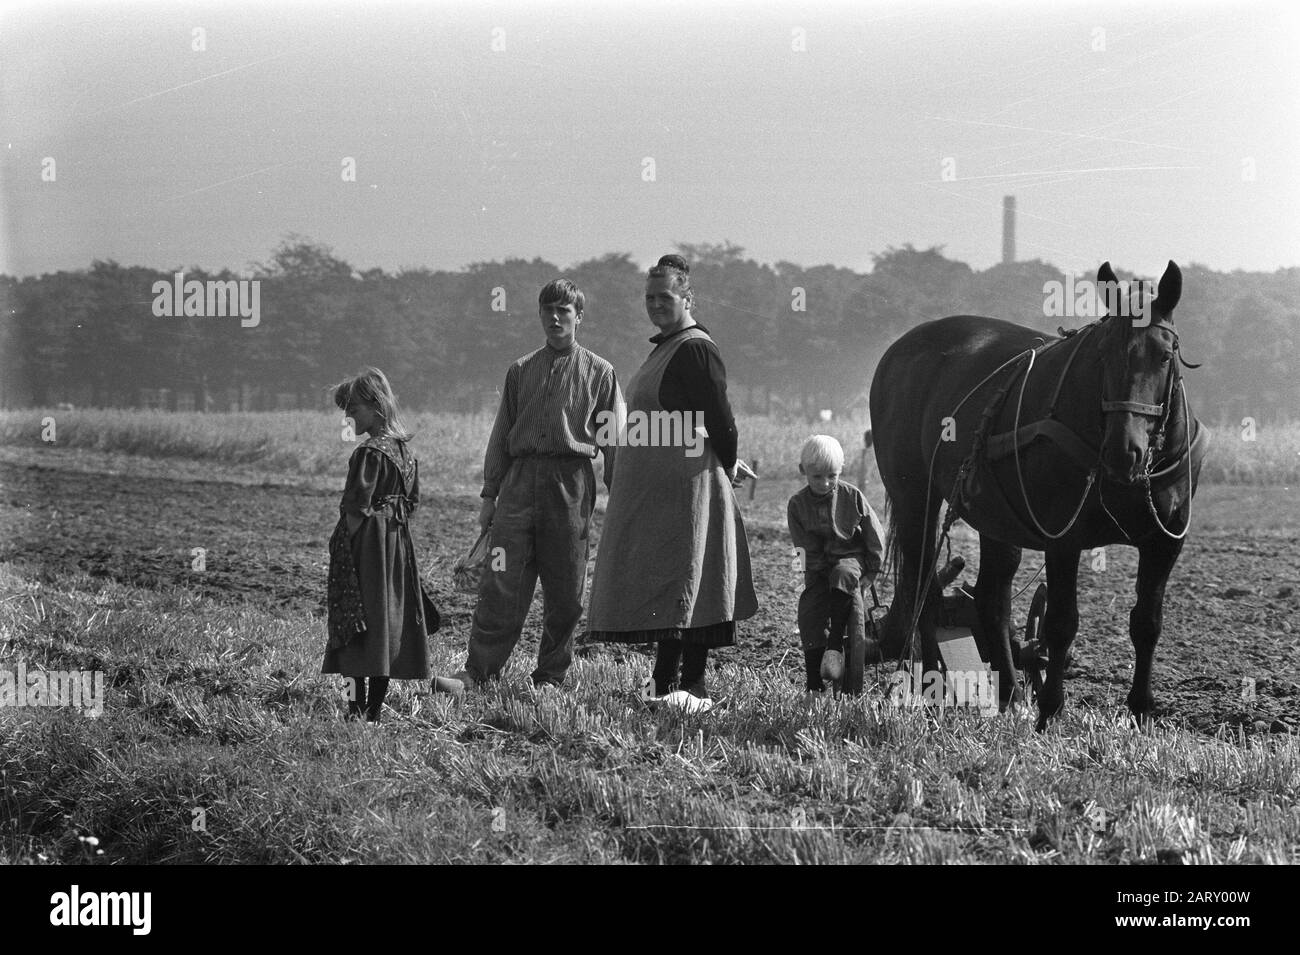 TV recordings for series Darryl, Jaap Schadenberg as Darryl with stepmother and little brother and sister at horse Date: August 31, 1972 Keywords: TV recordings Personal name: BARTJE, Jaap Schhadenberg Stock Photo